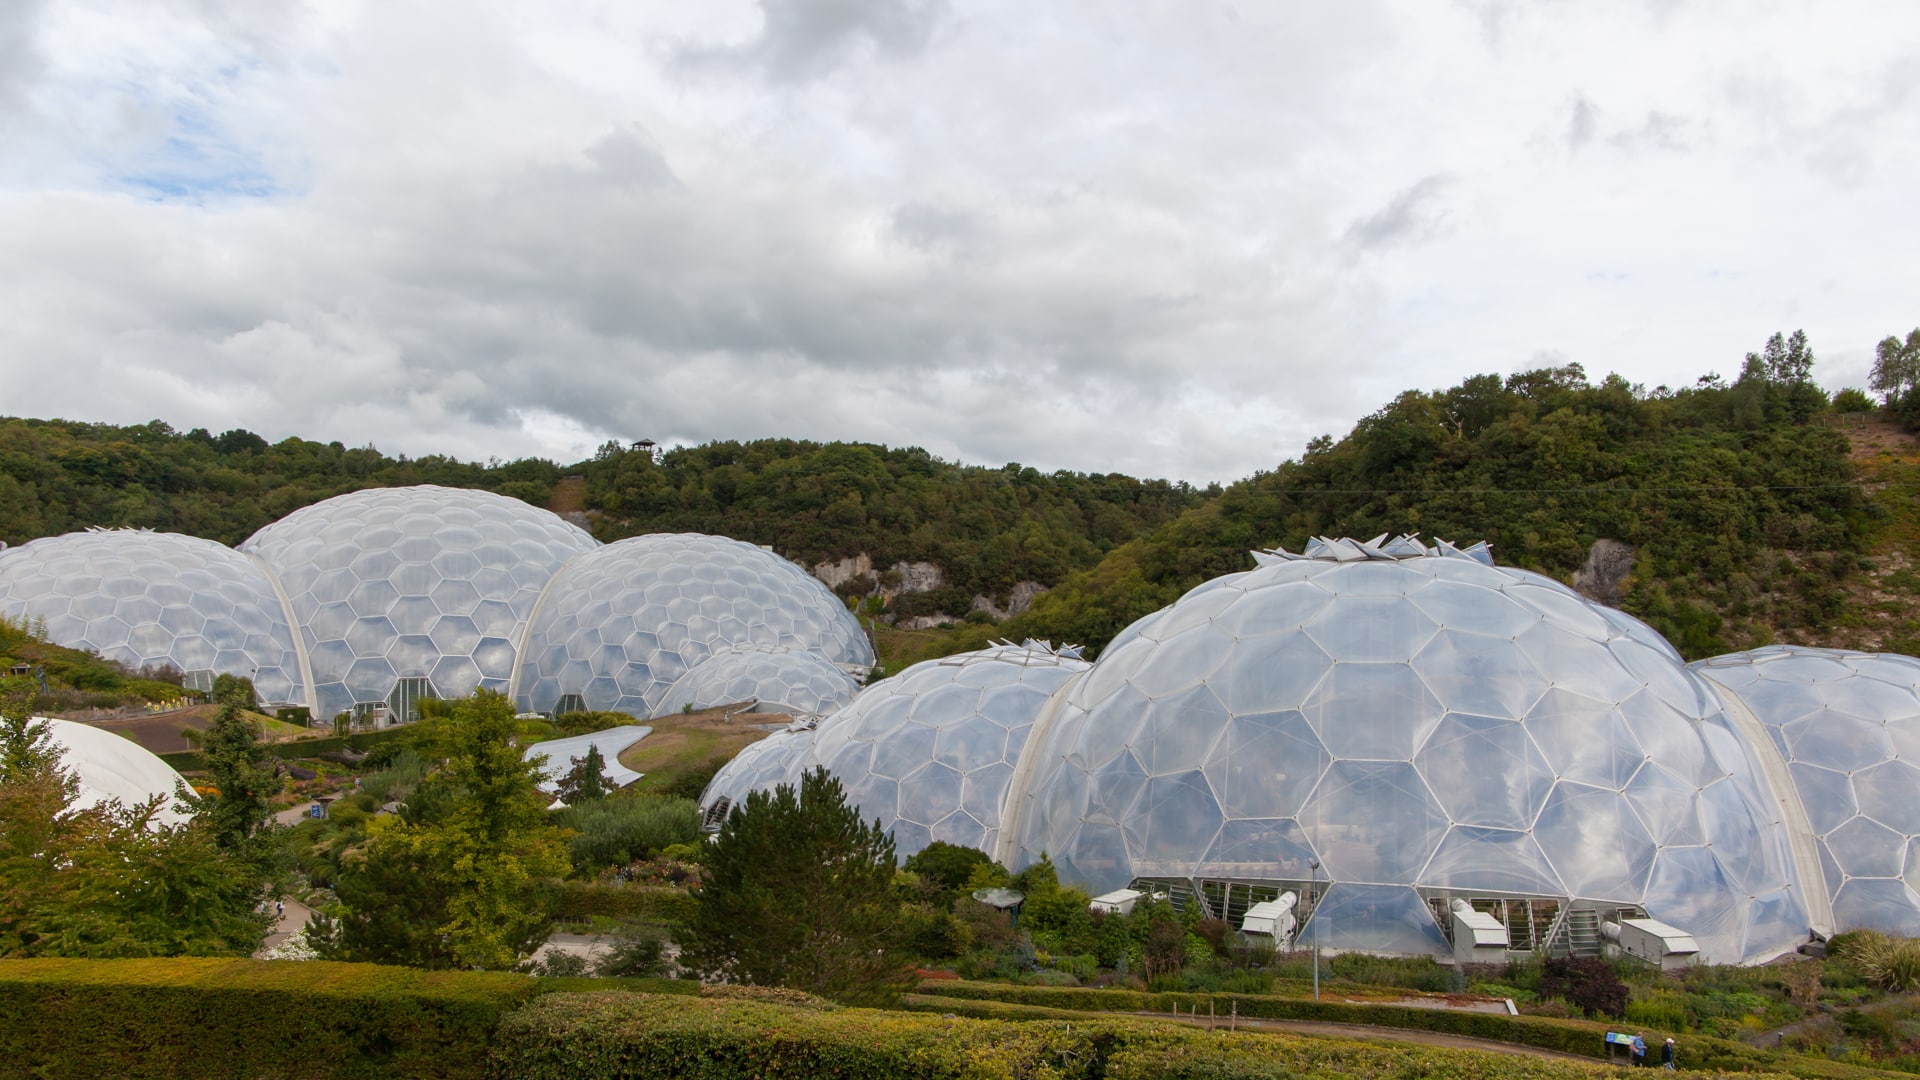 The domes of the Eden Project, regarded as one of the best places to visit in Cornwall